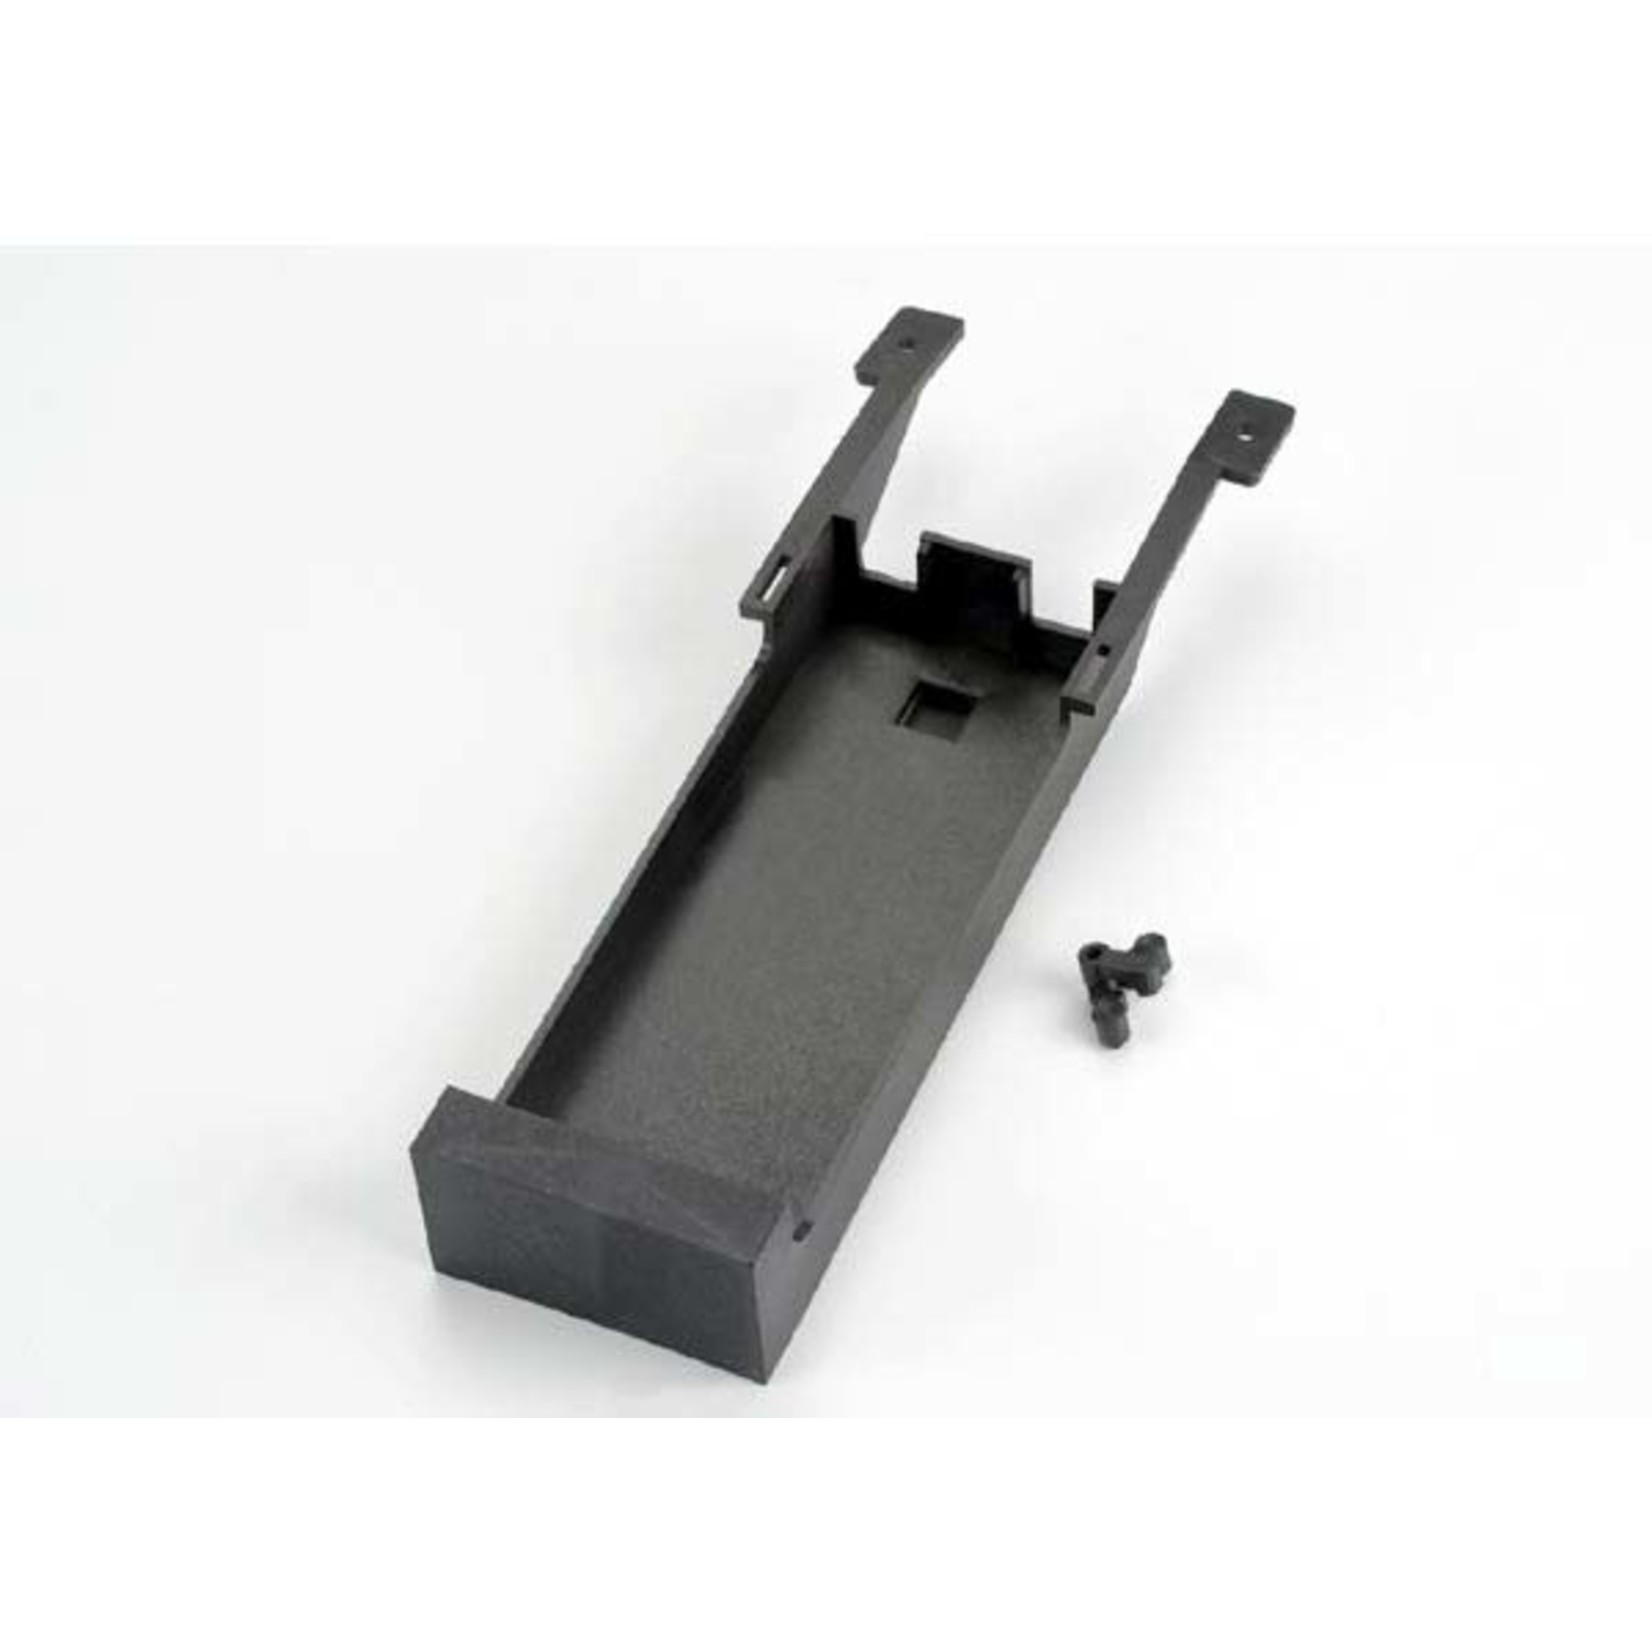 Traxxas 3821 - Battery compartment